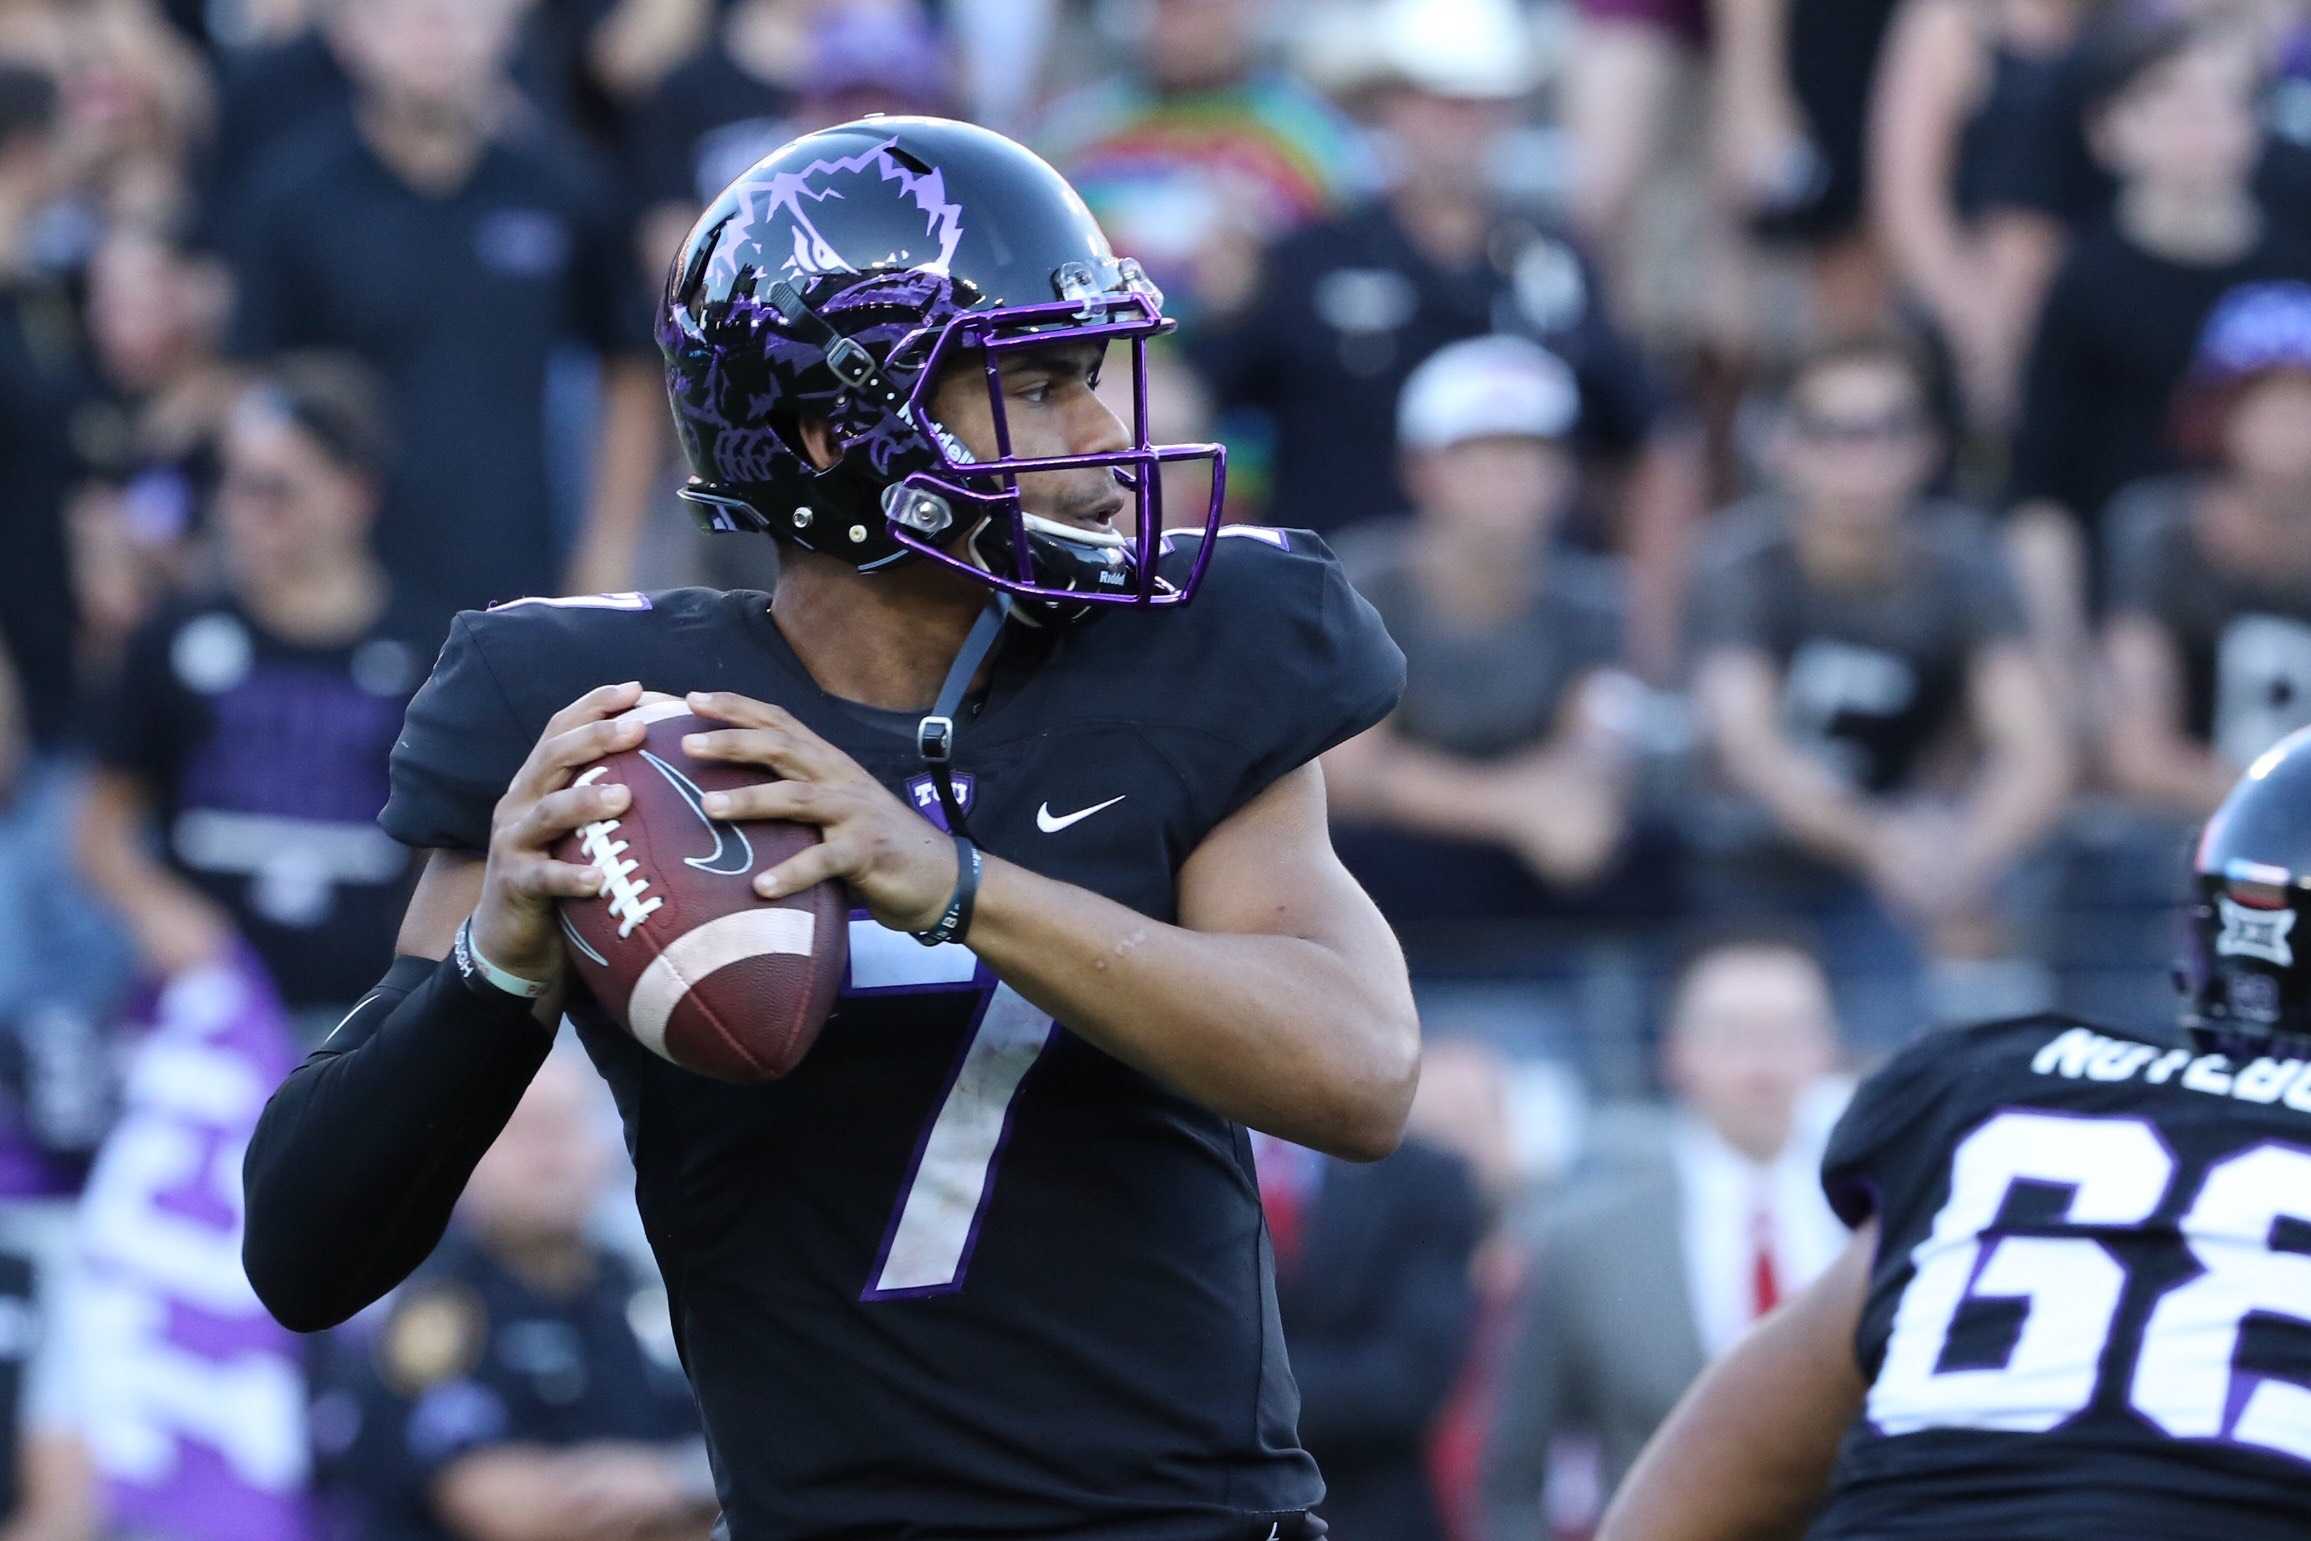 TCU quarterback Kenny Hill scans the field for open receivers against the Oklahoma Sooners. (Sam Bruton/TCU staff photographer)